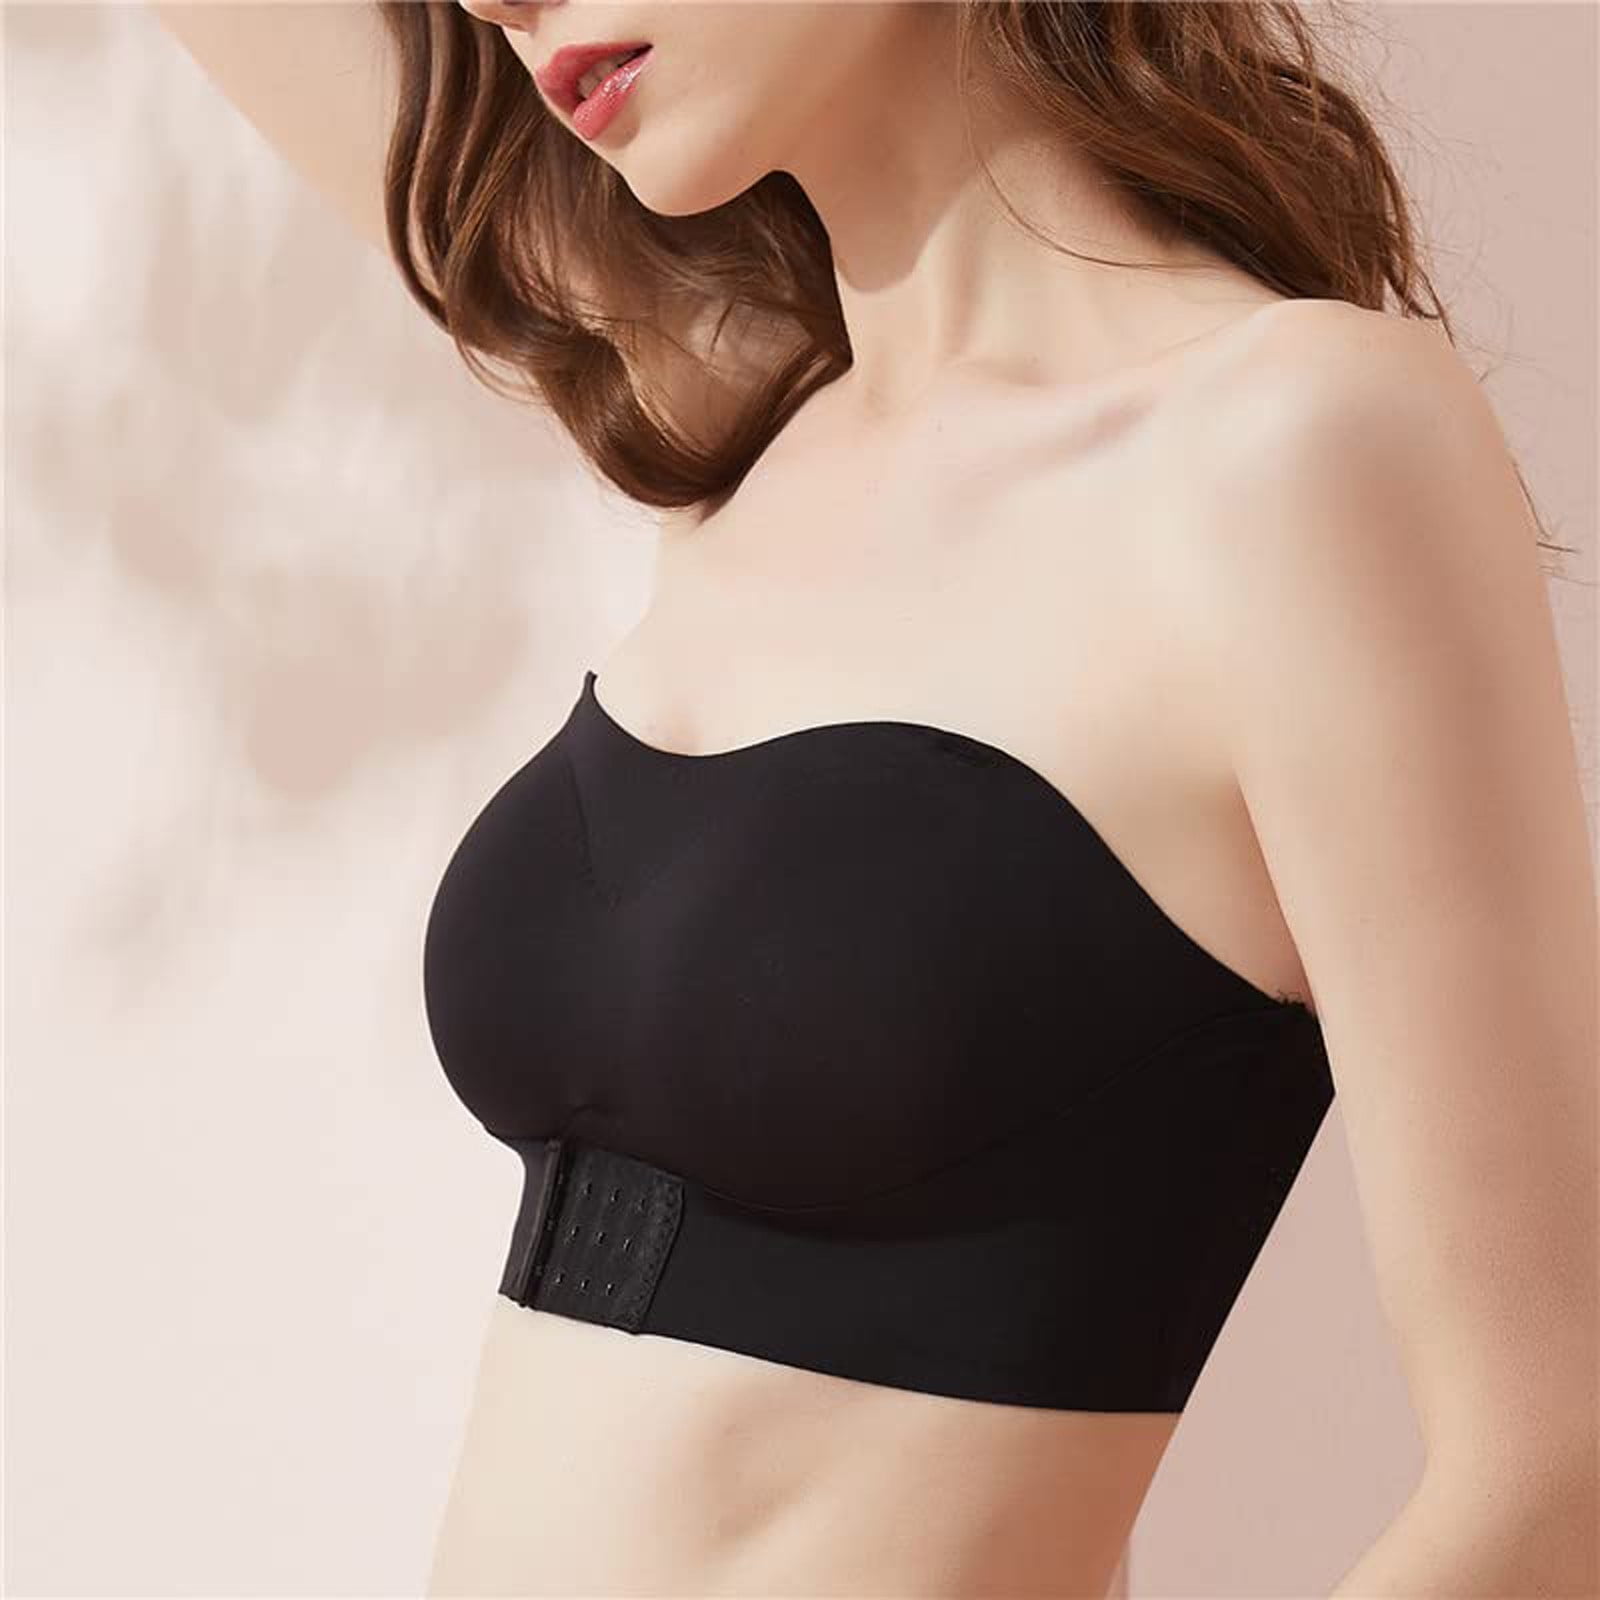 Qcmgmg Strapless Bras for Women Comfort Full Coverage